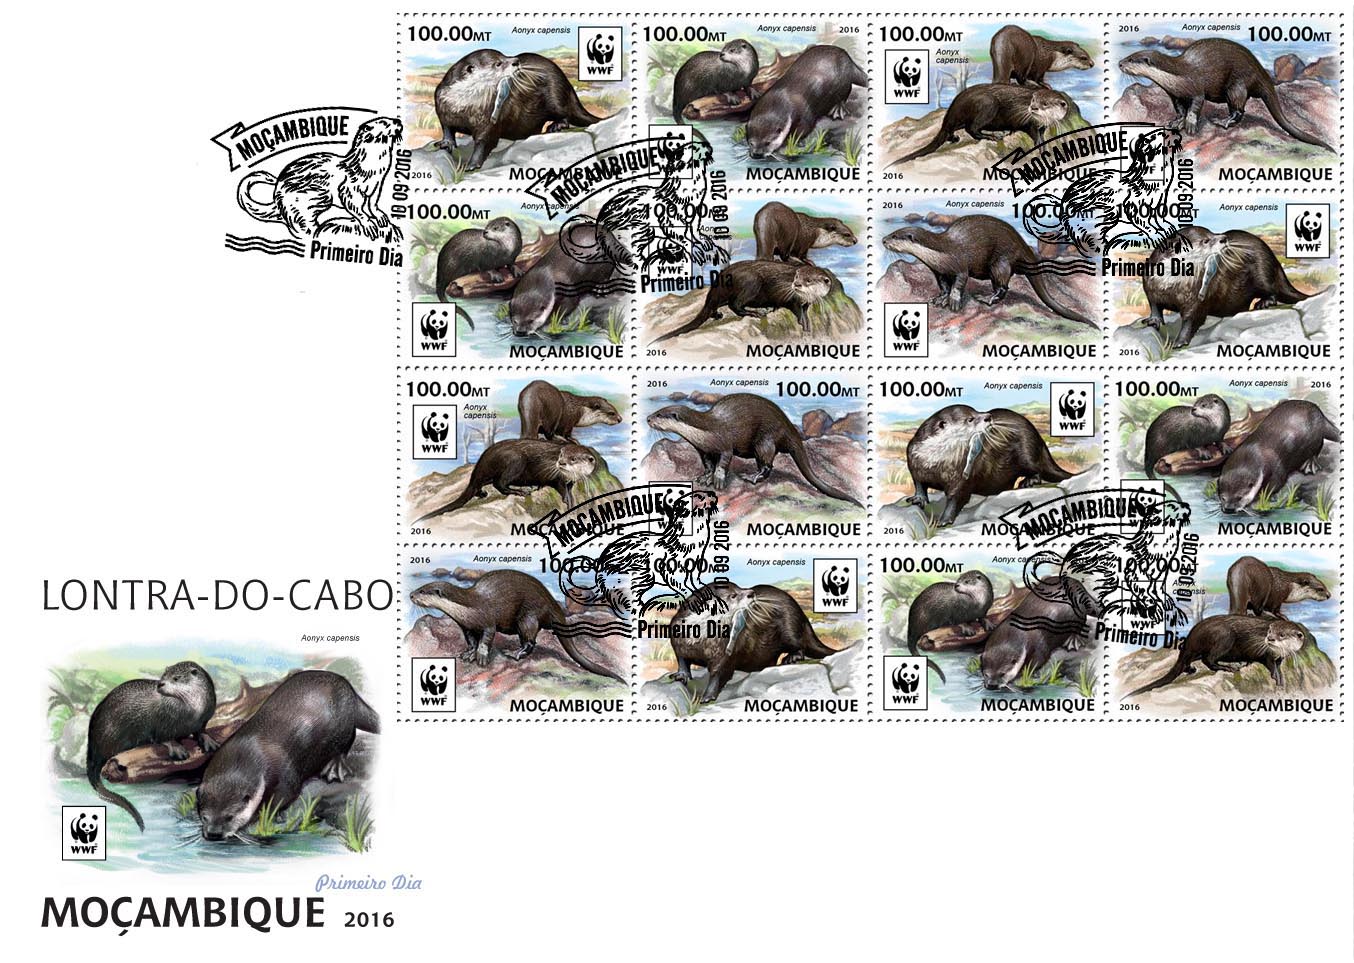 WWF – Otter (FDC) - Issue of Mozambique postage Stamps